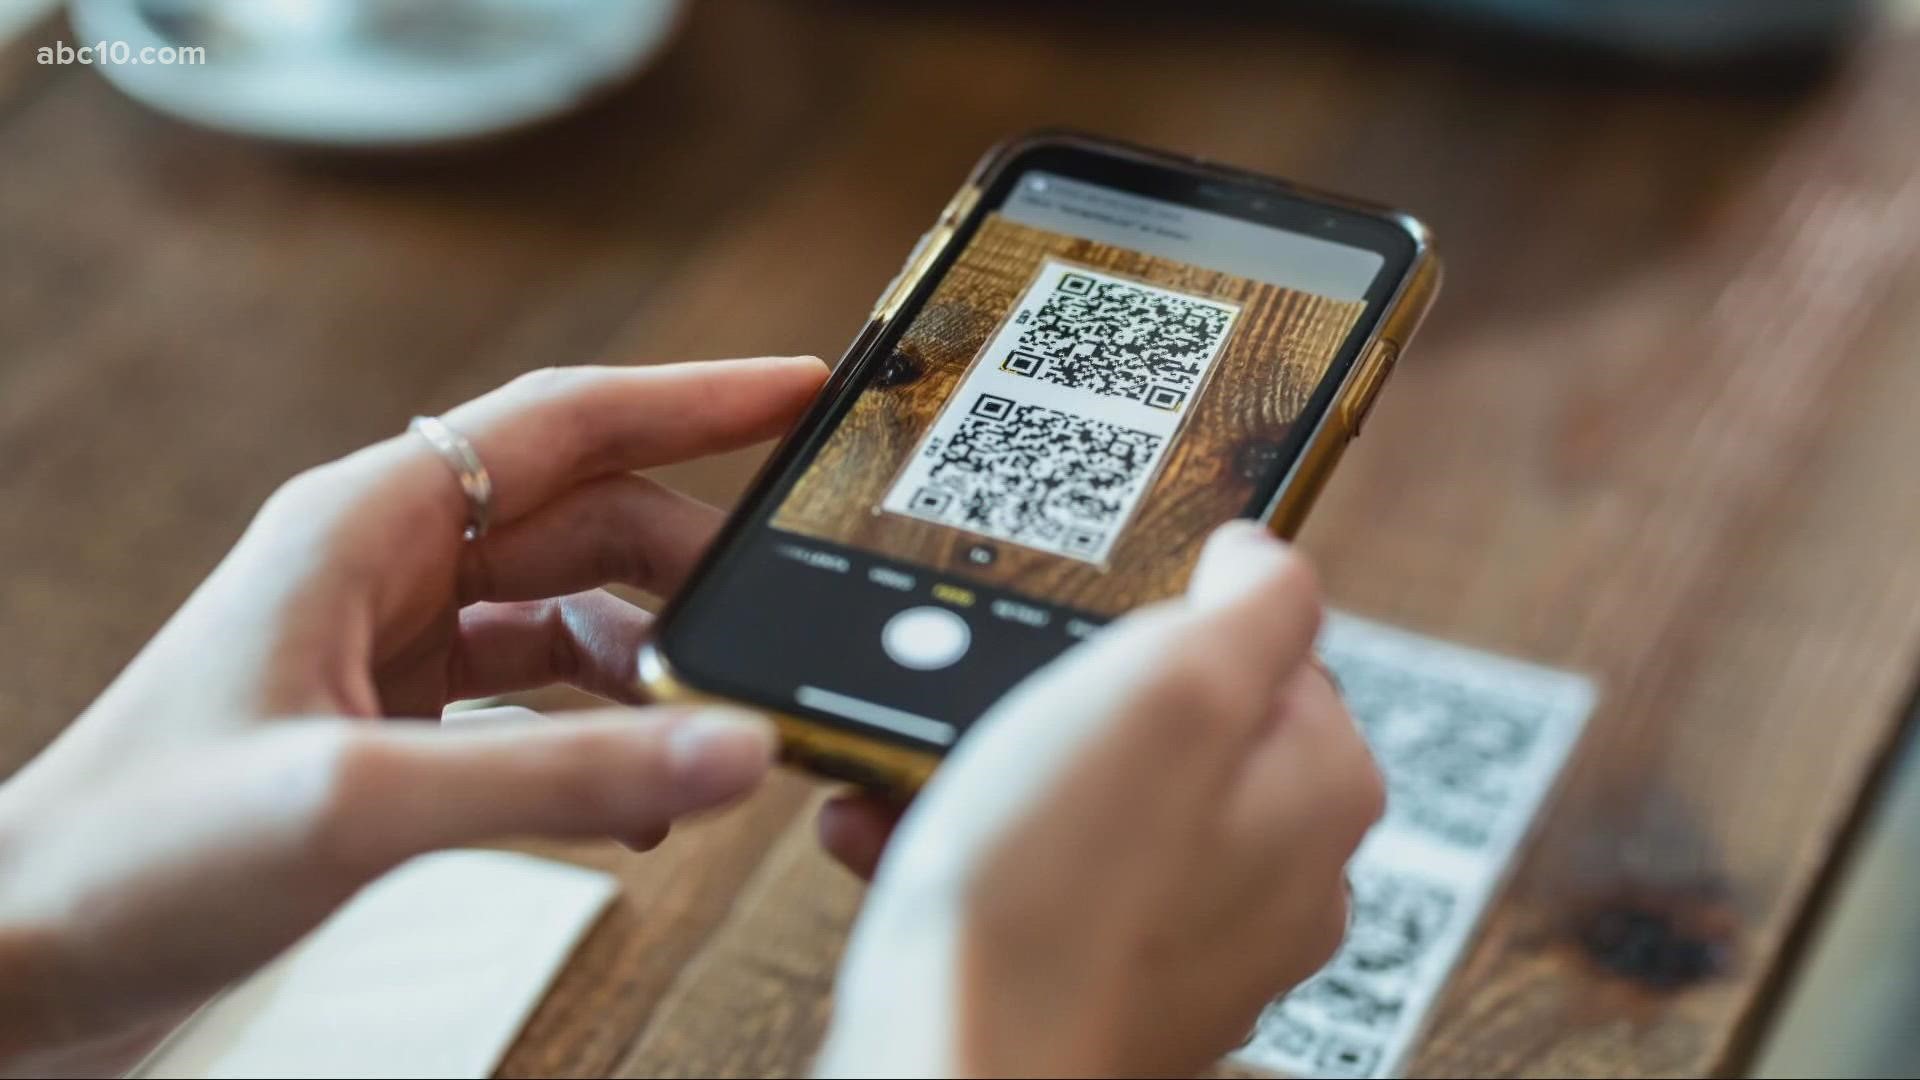 A Sacramento security expert shares some tips on how to avoid a QR code scam.